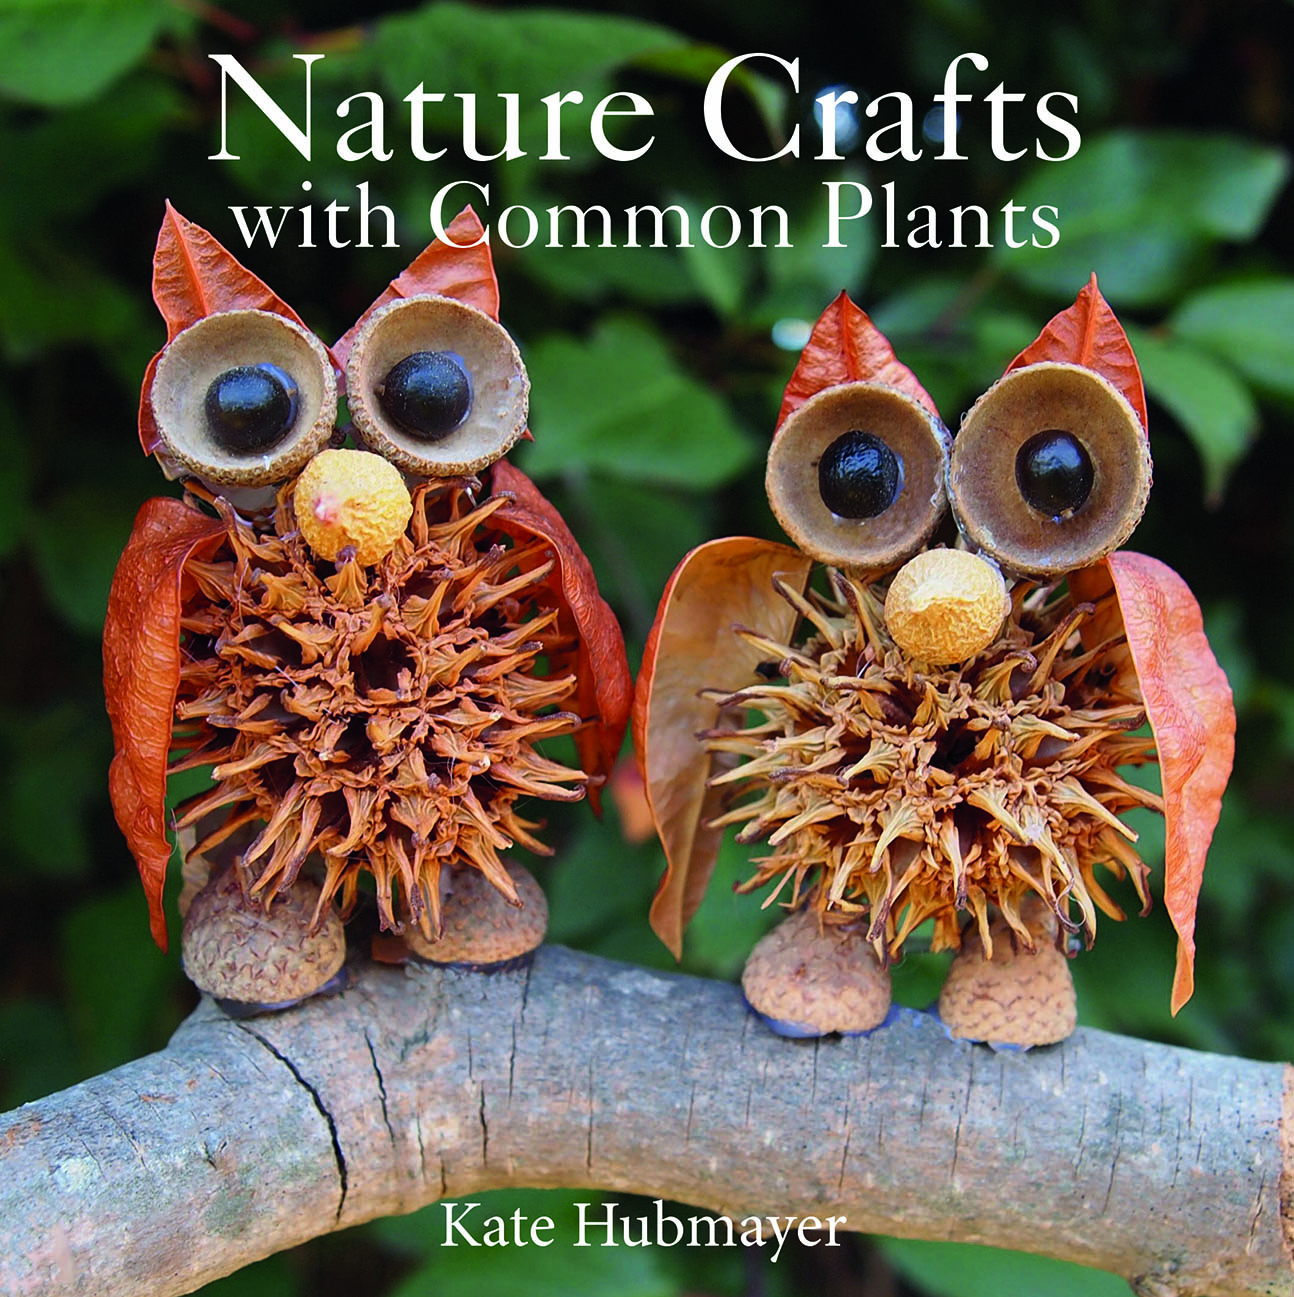 Nature-Crafts-with-Common-Plants-Book-Kate-Hubmayer